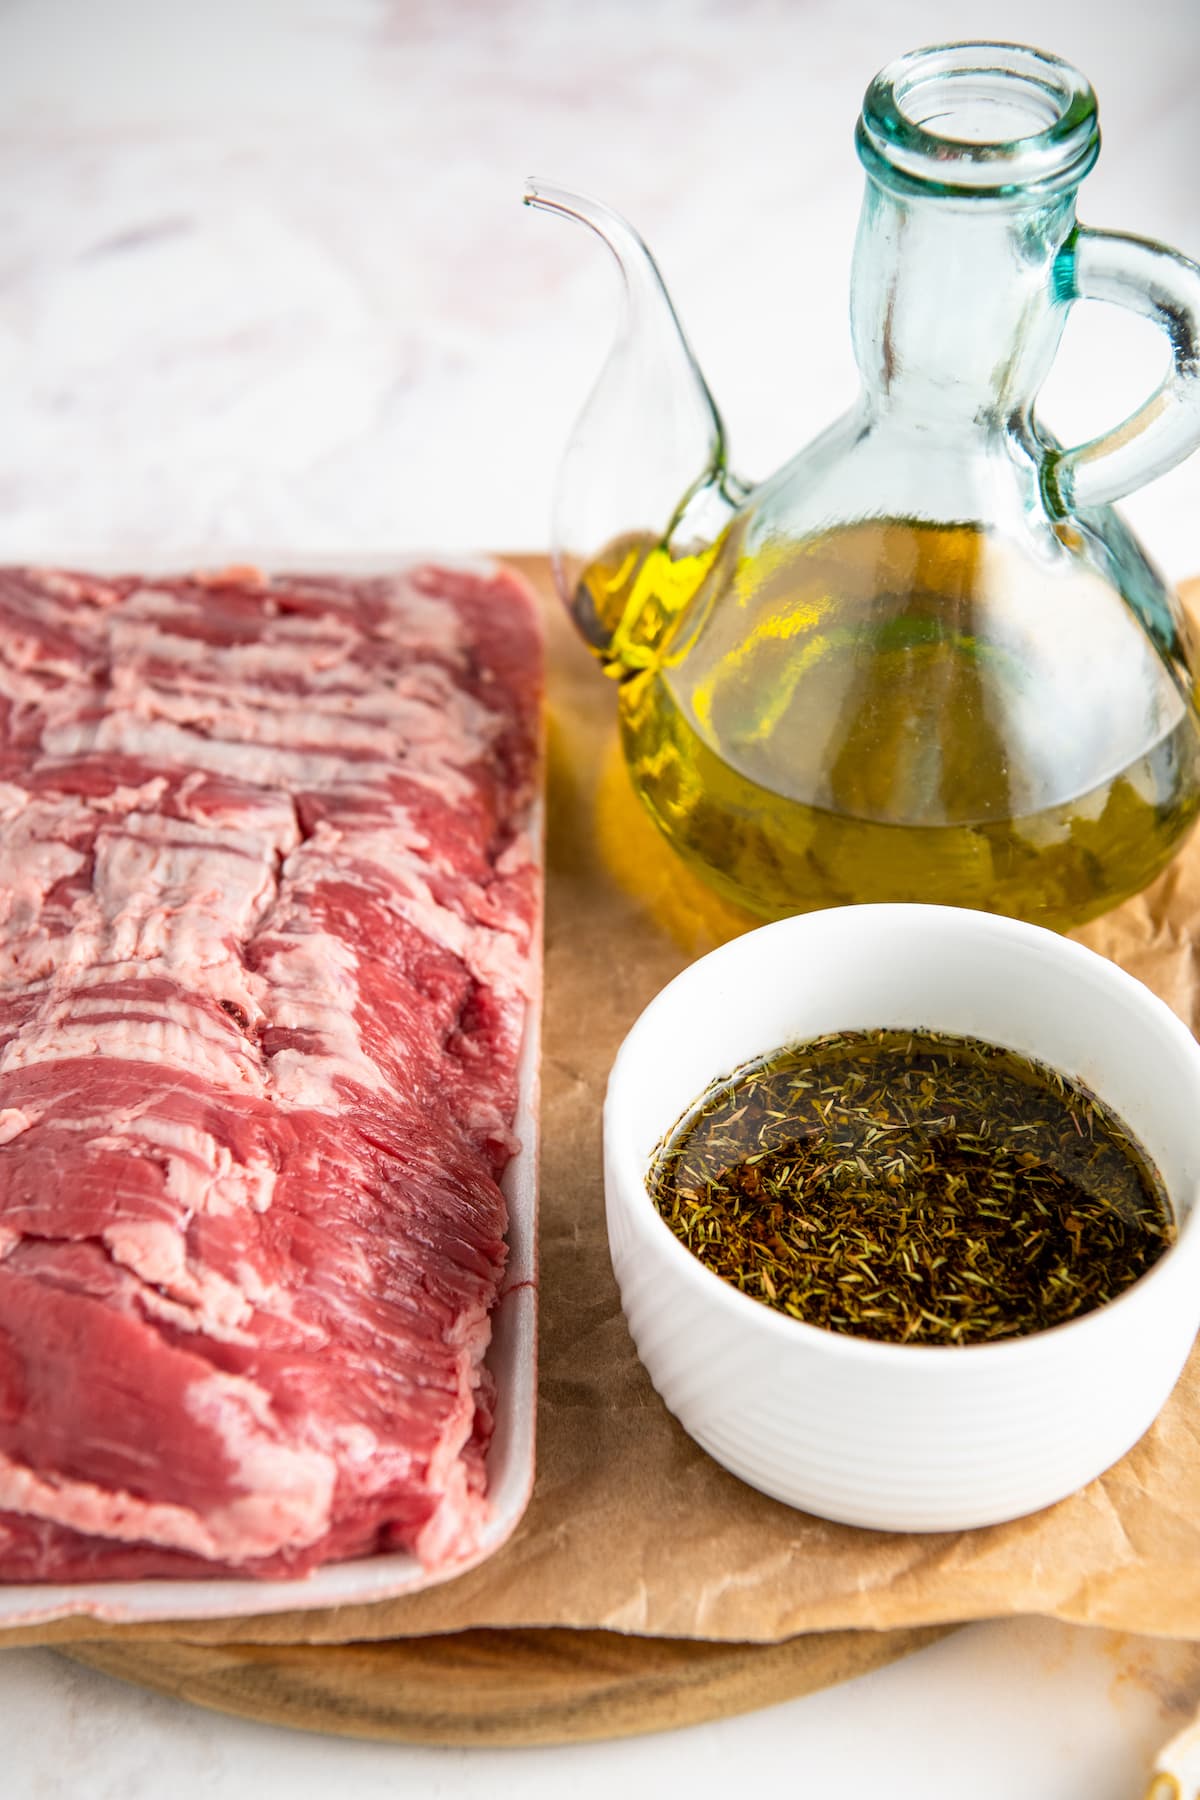 A raw skirt steak next to a jar of oil and a bowl of marinade